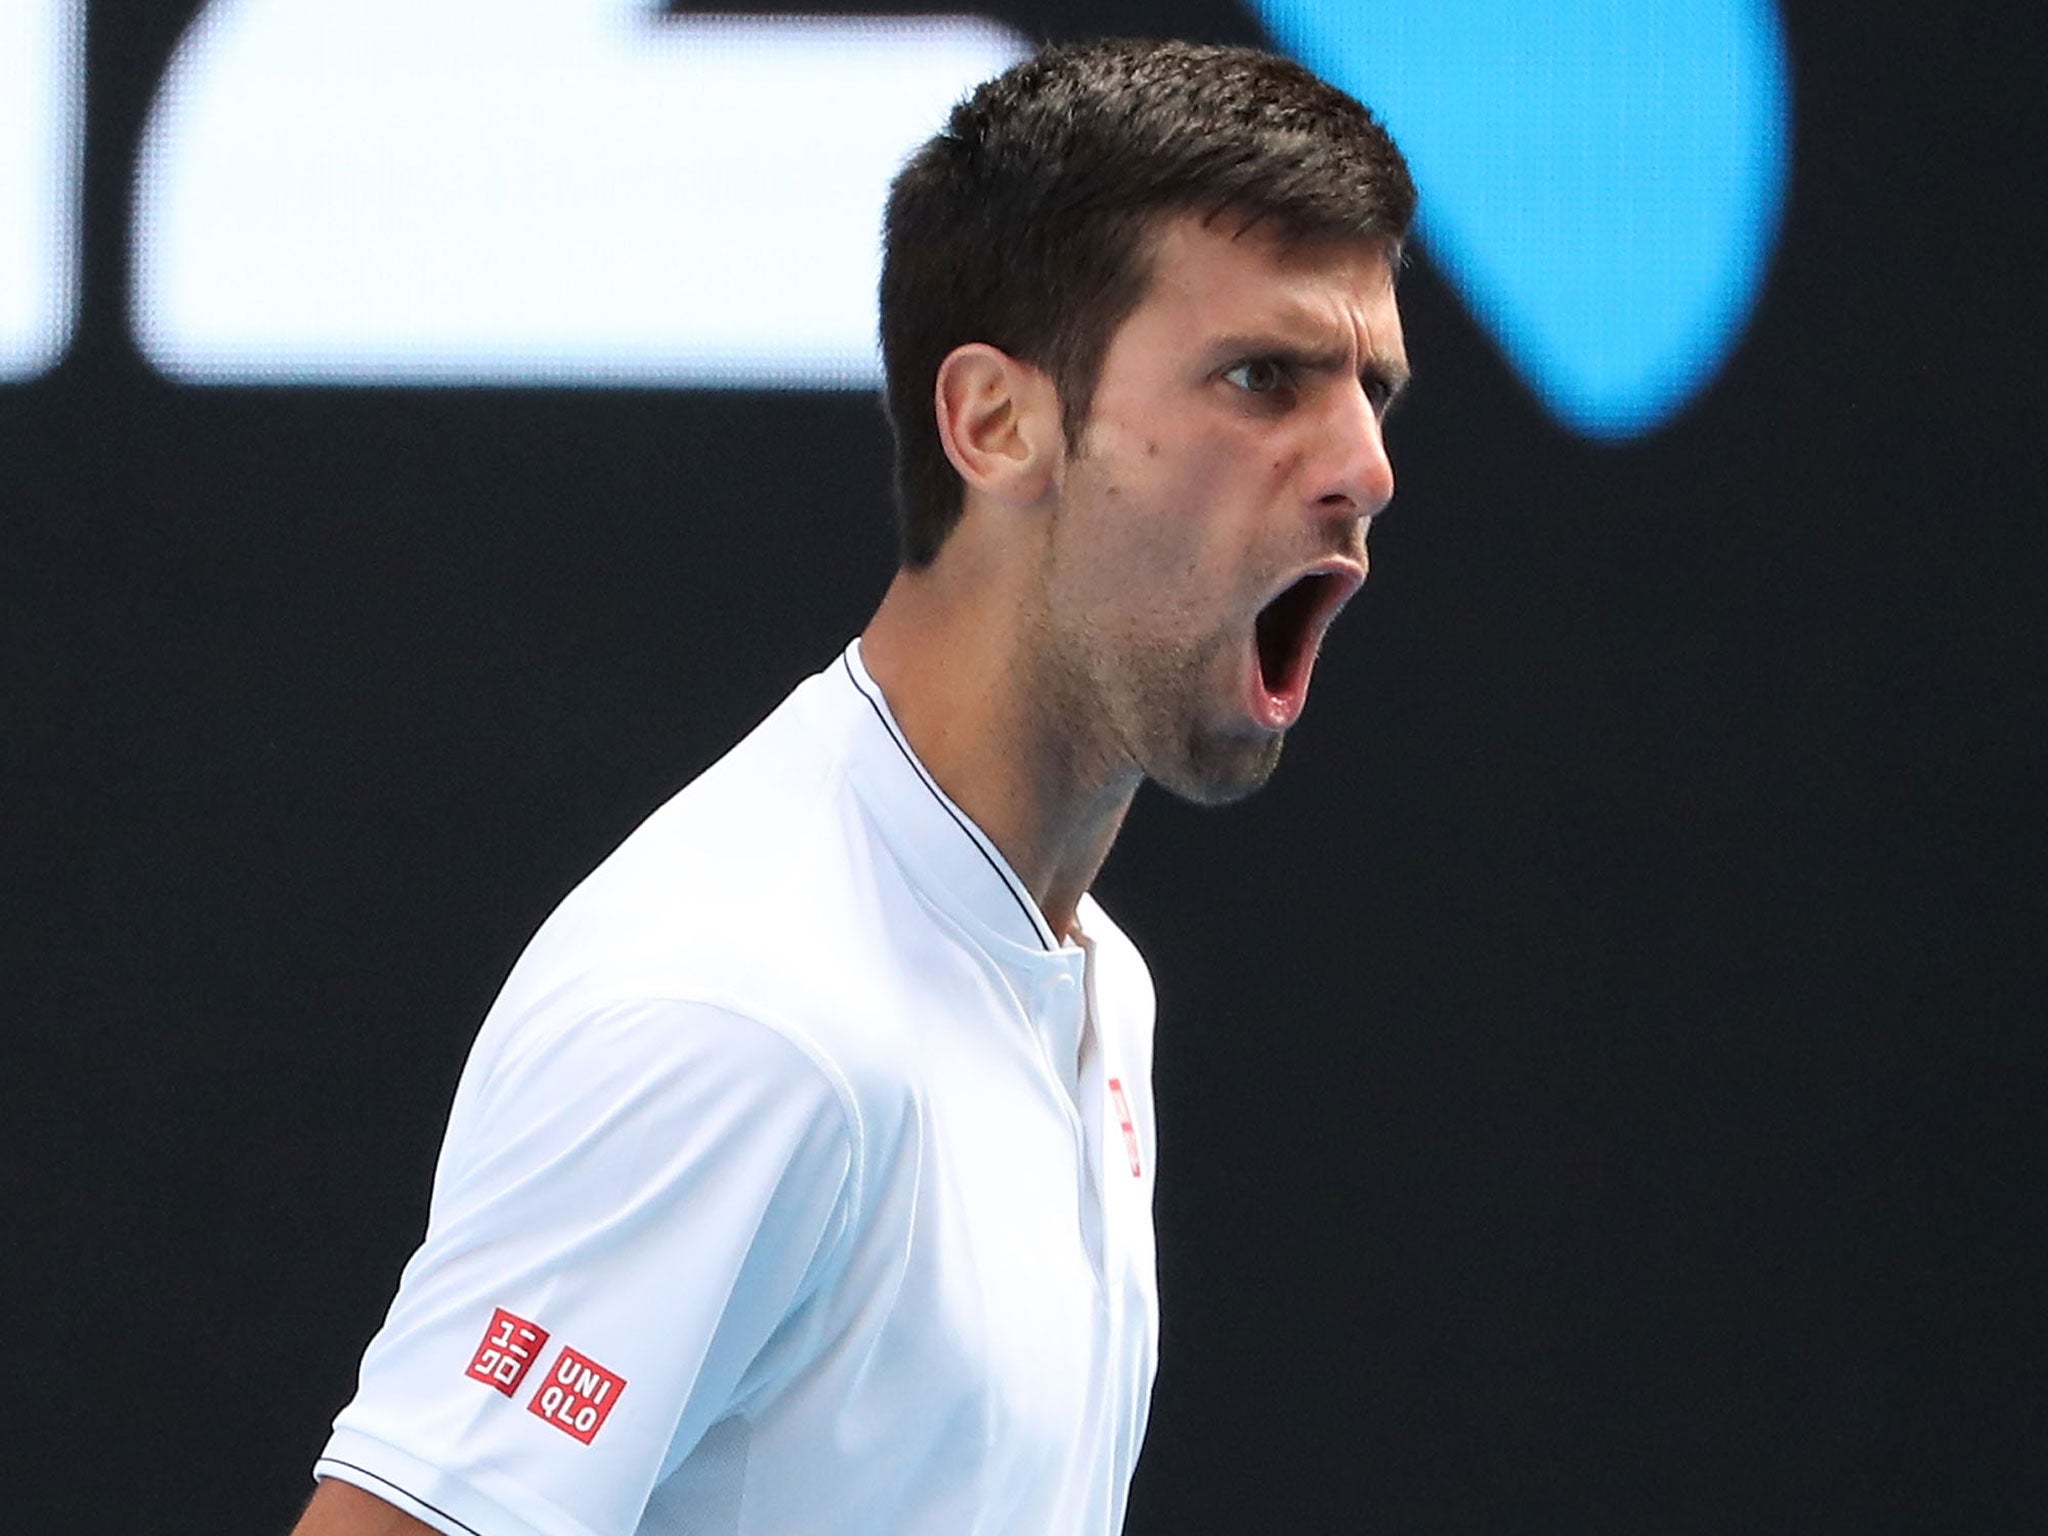 Djokovic was knocked out by Denis Istomin on Thursday